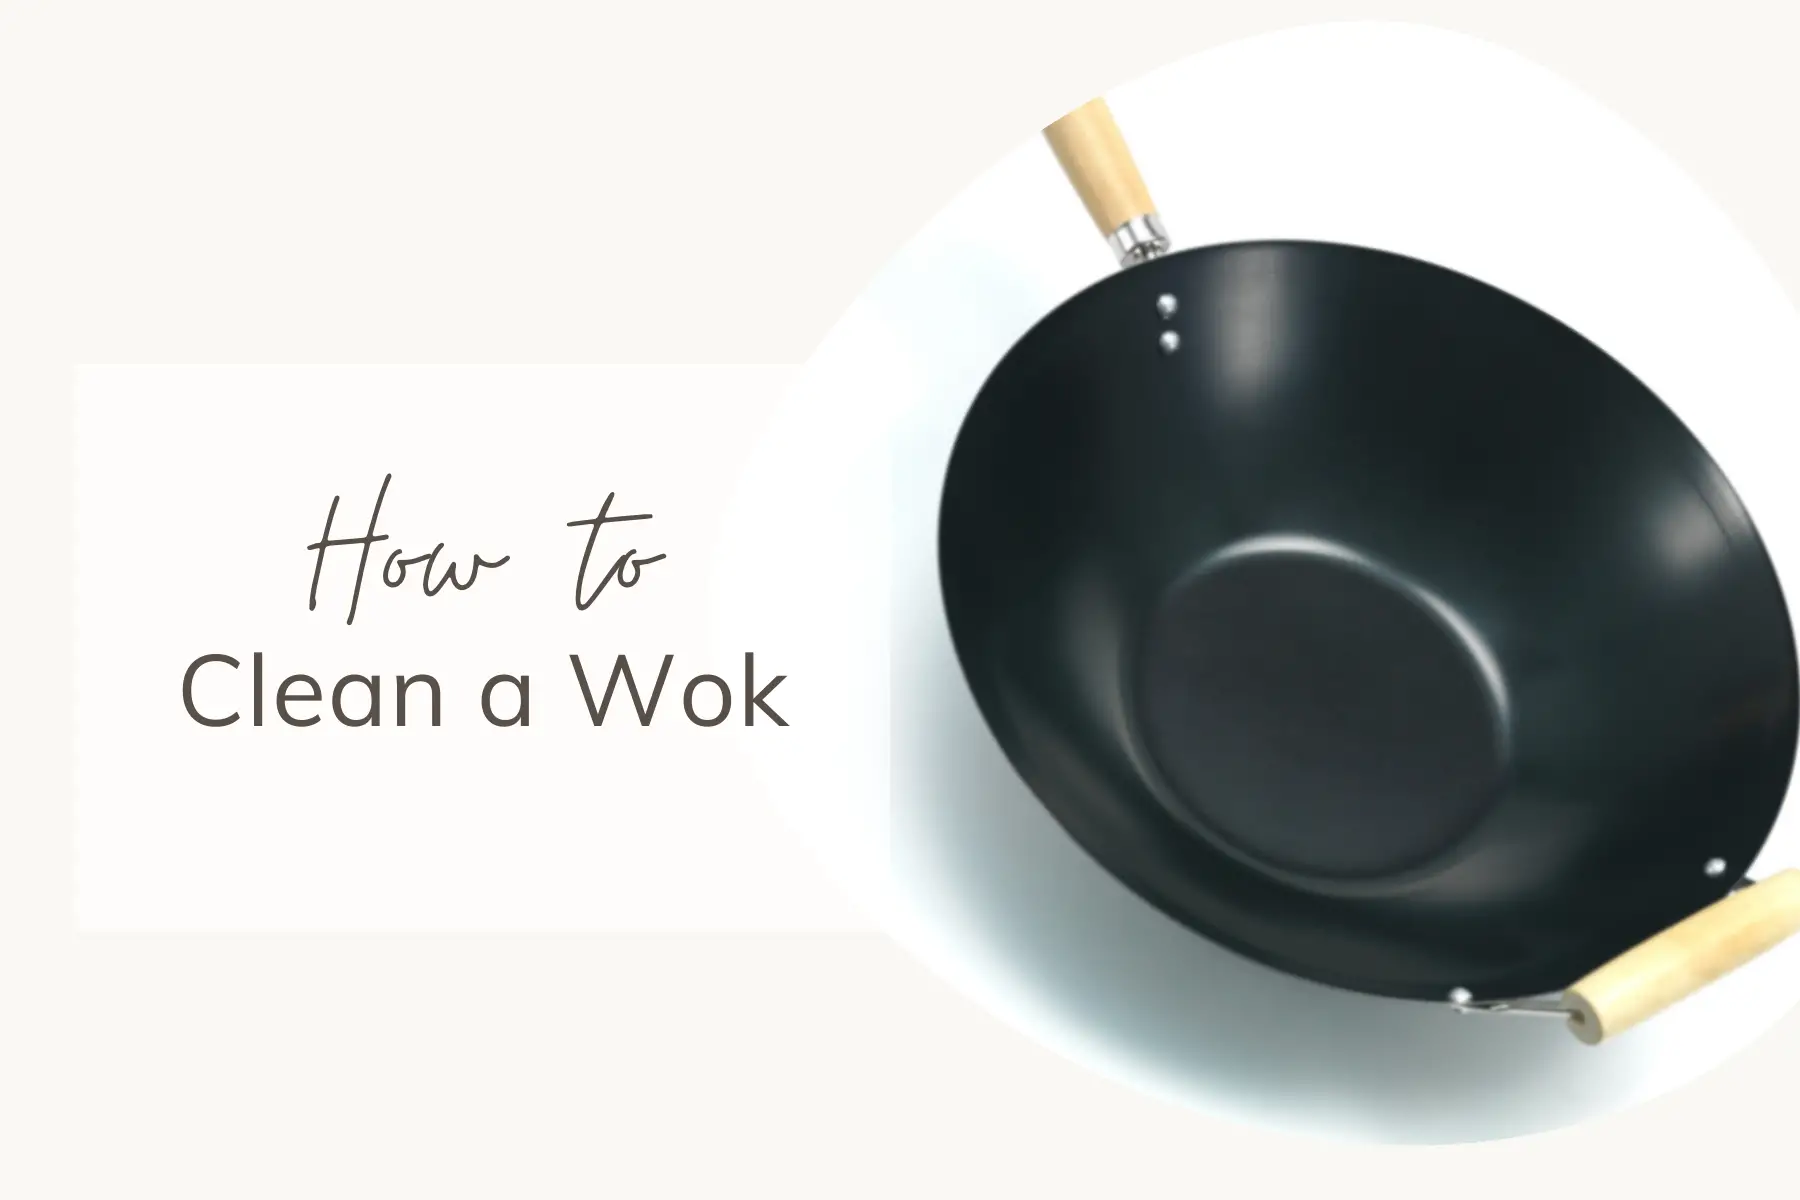 How to clean a wok